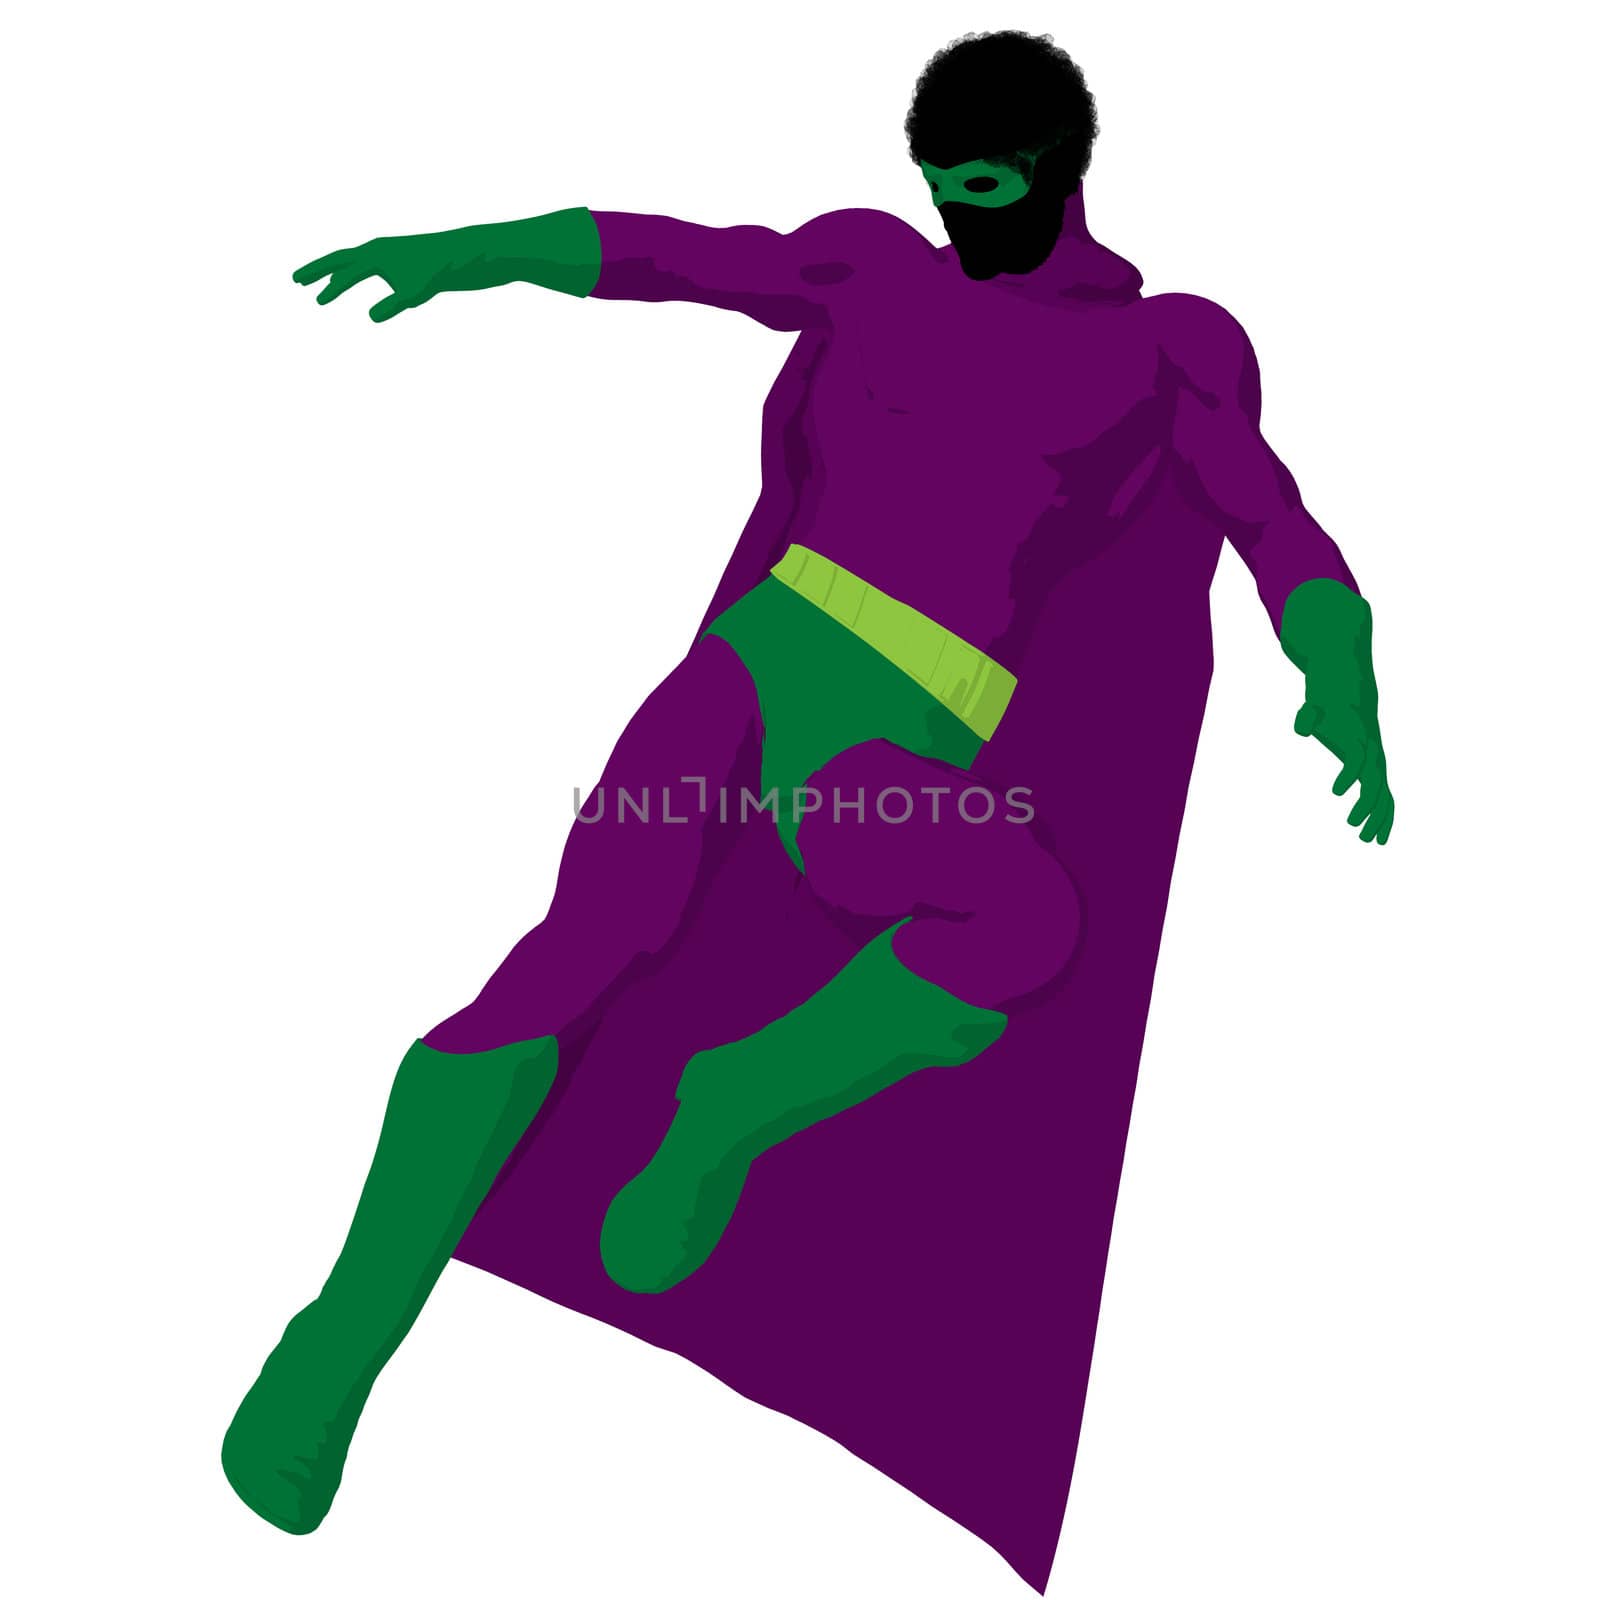 African american super hero silhouette on a white background